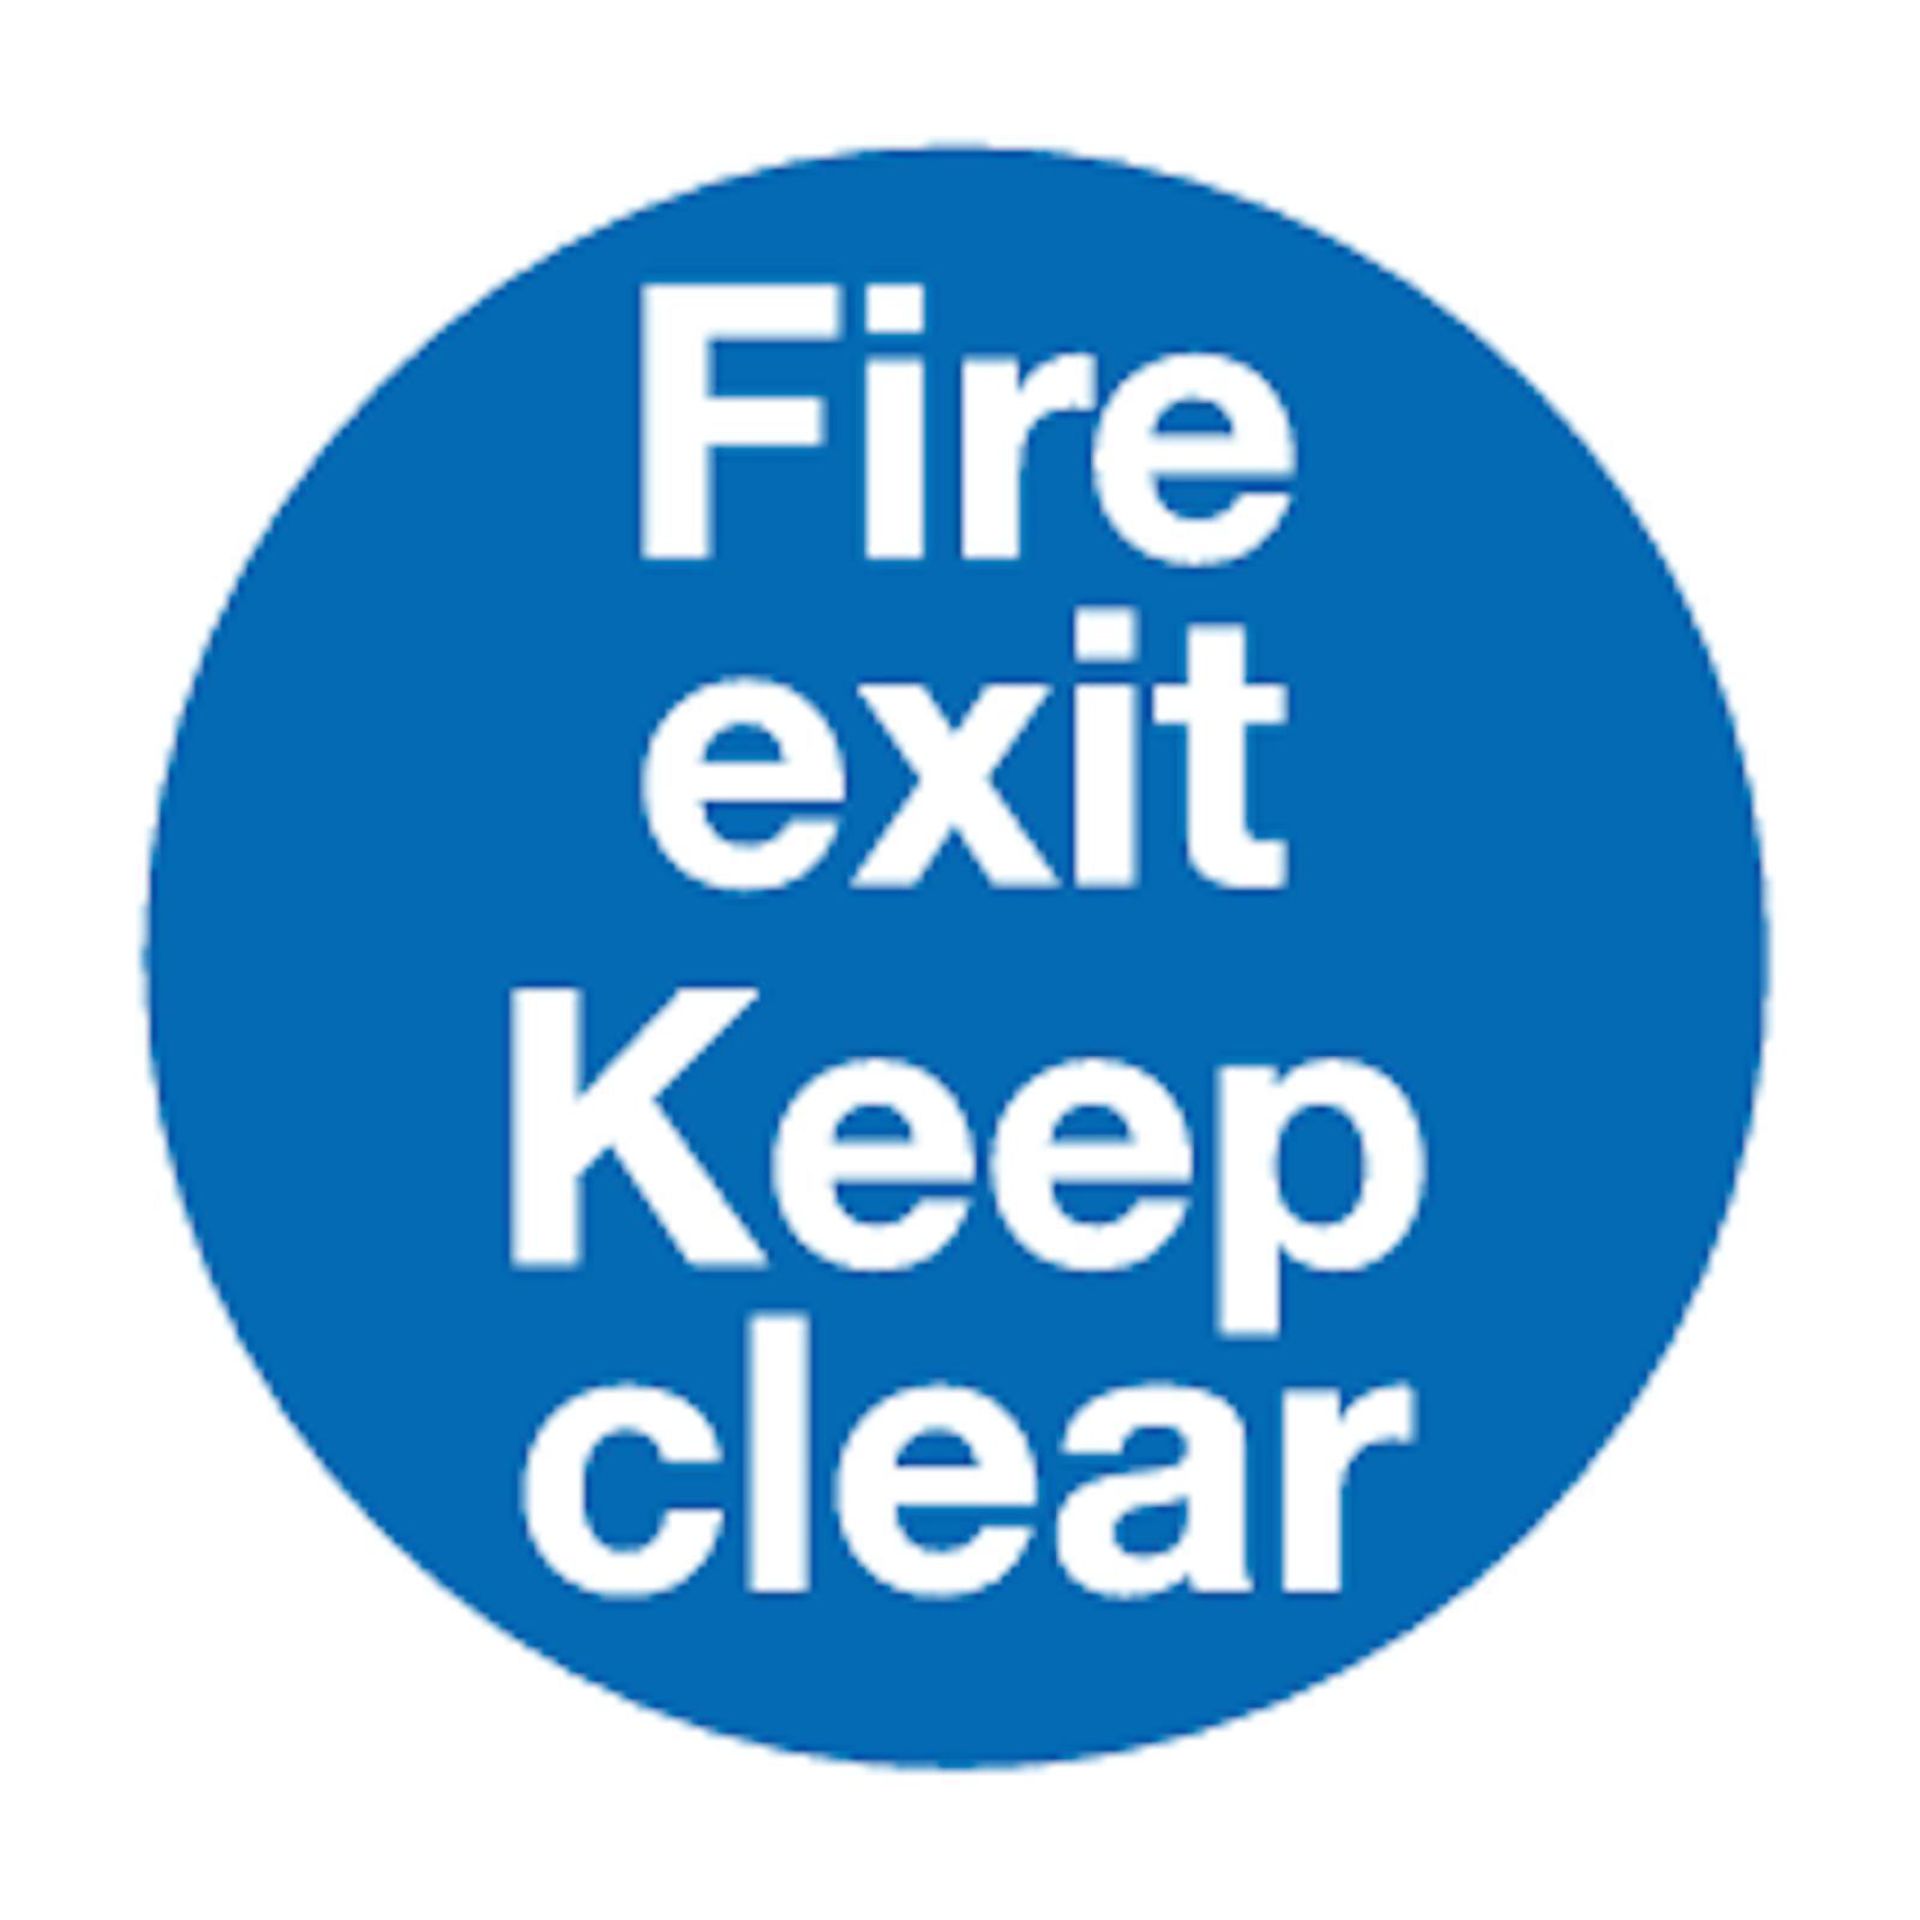 10 x Fire exit keep clear vinyl safety sign 20 x 20mm